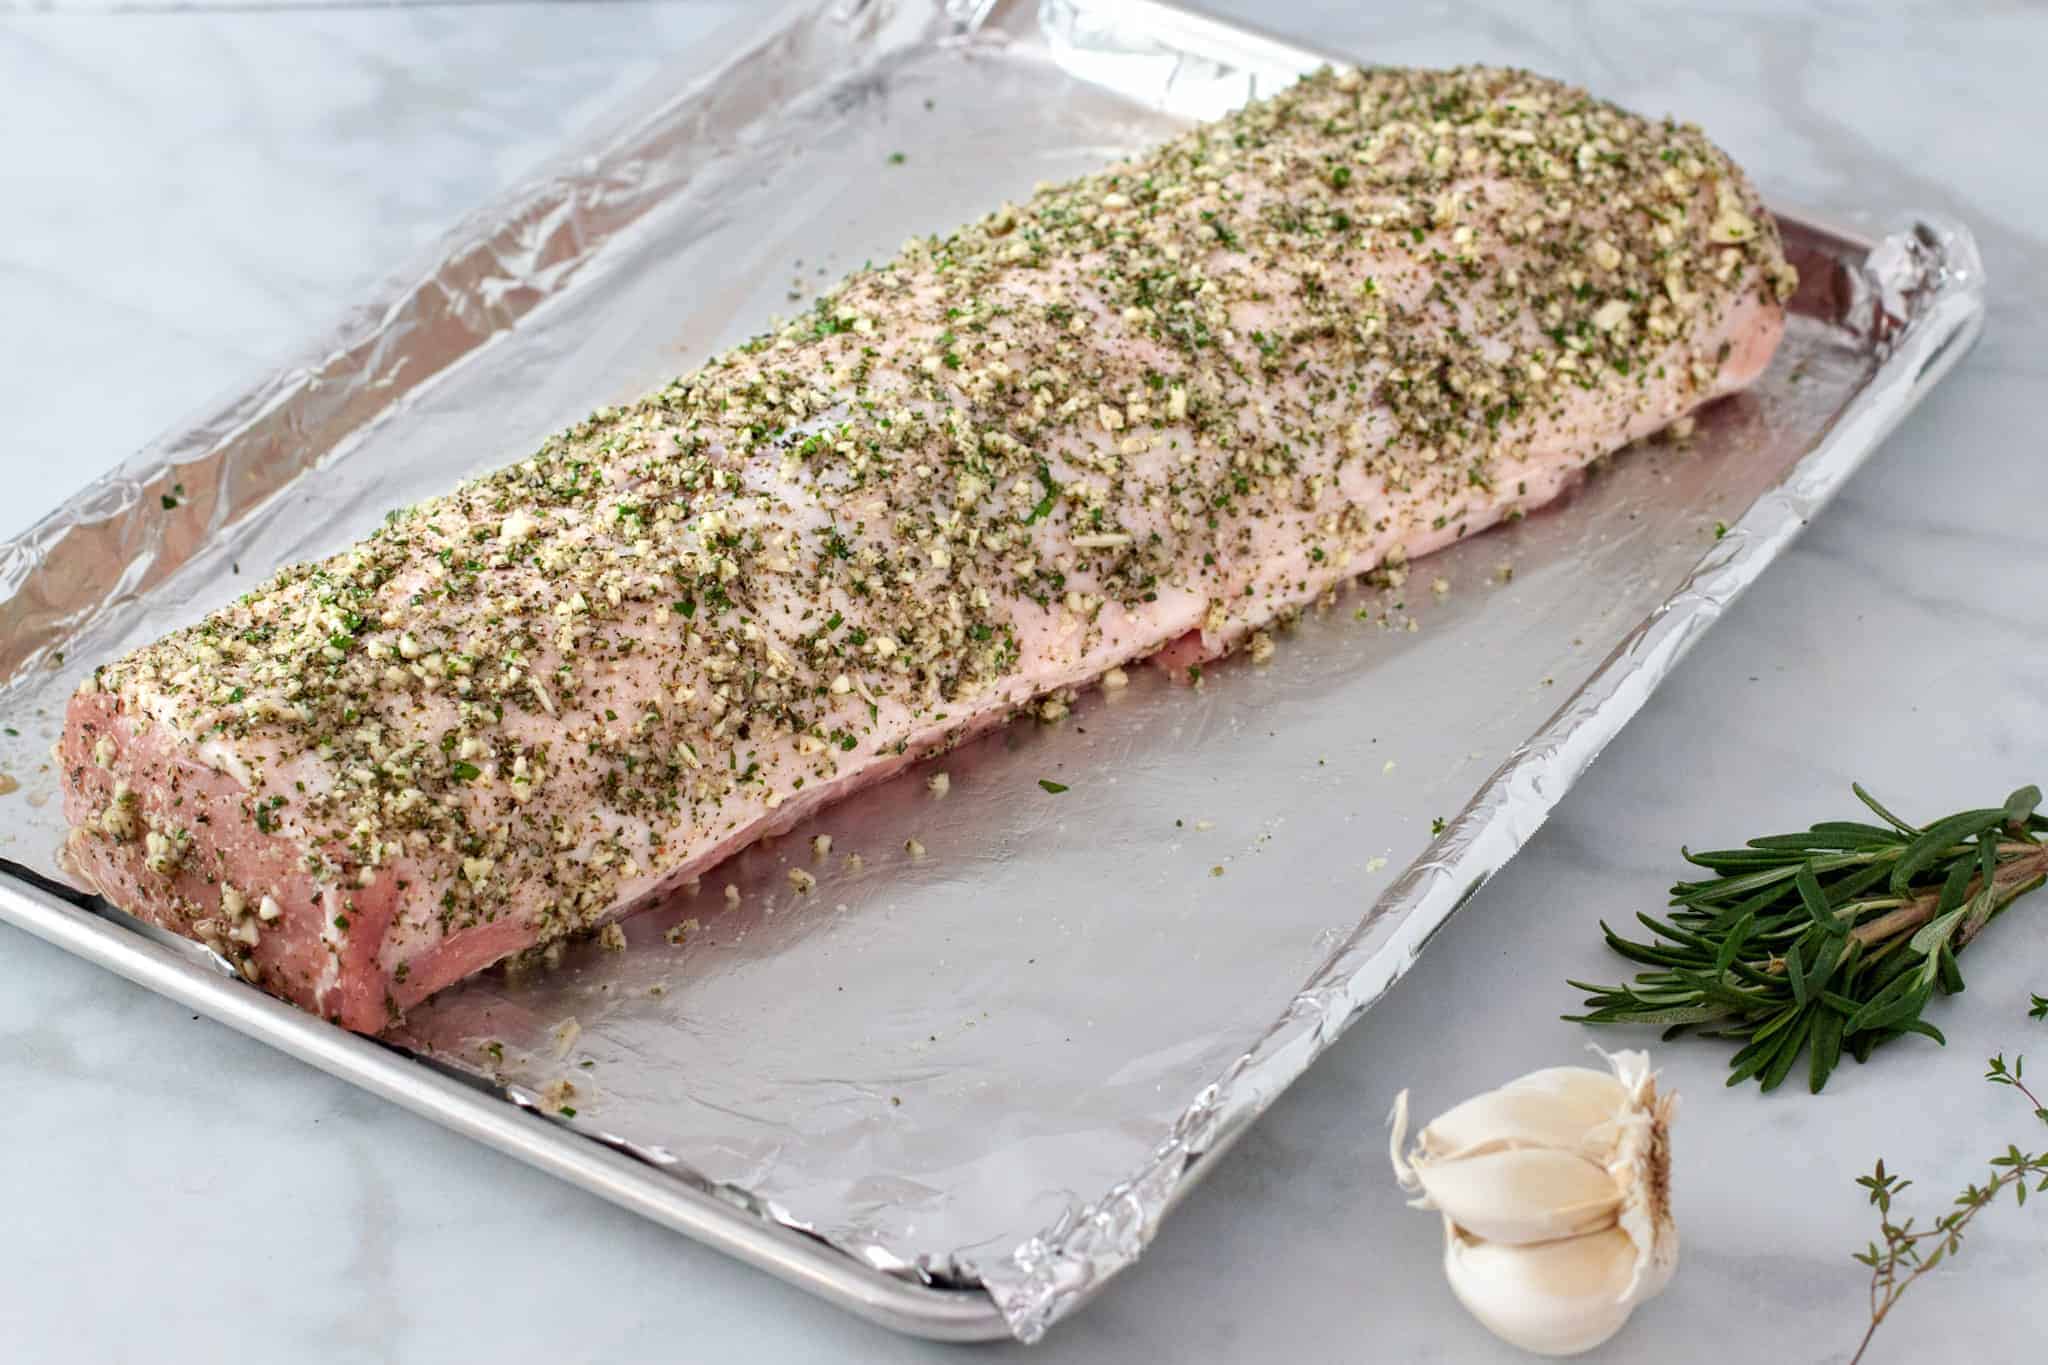 In this picture the pork loin is coated with a layer of the herb mixture before roasting. 